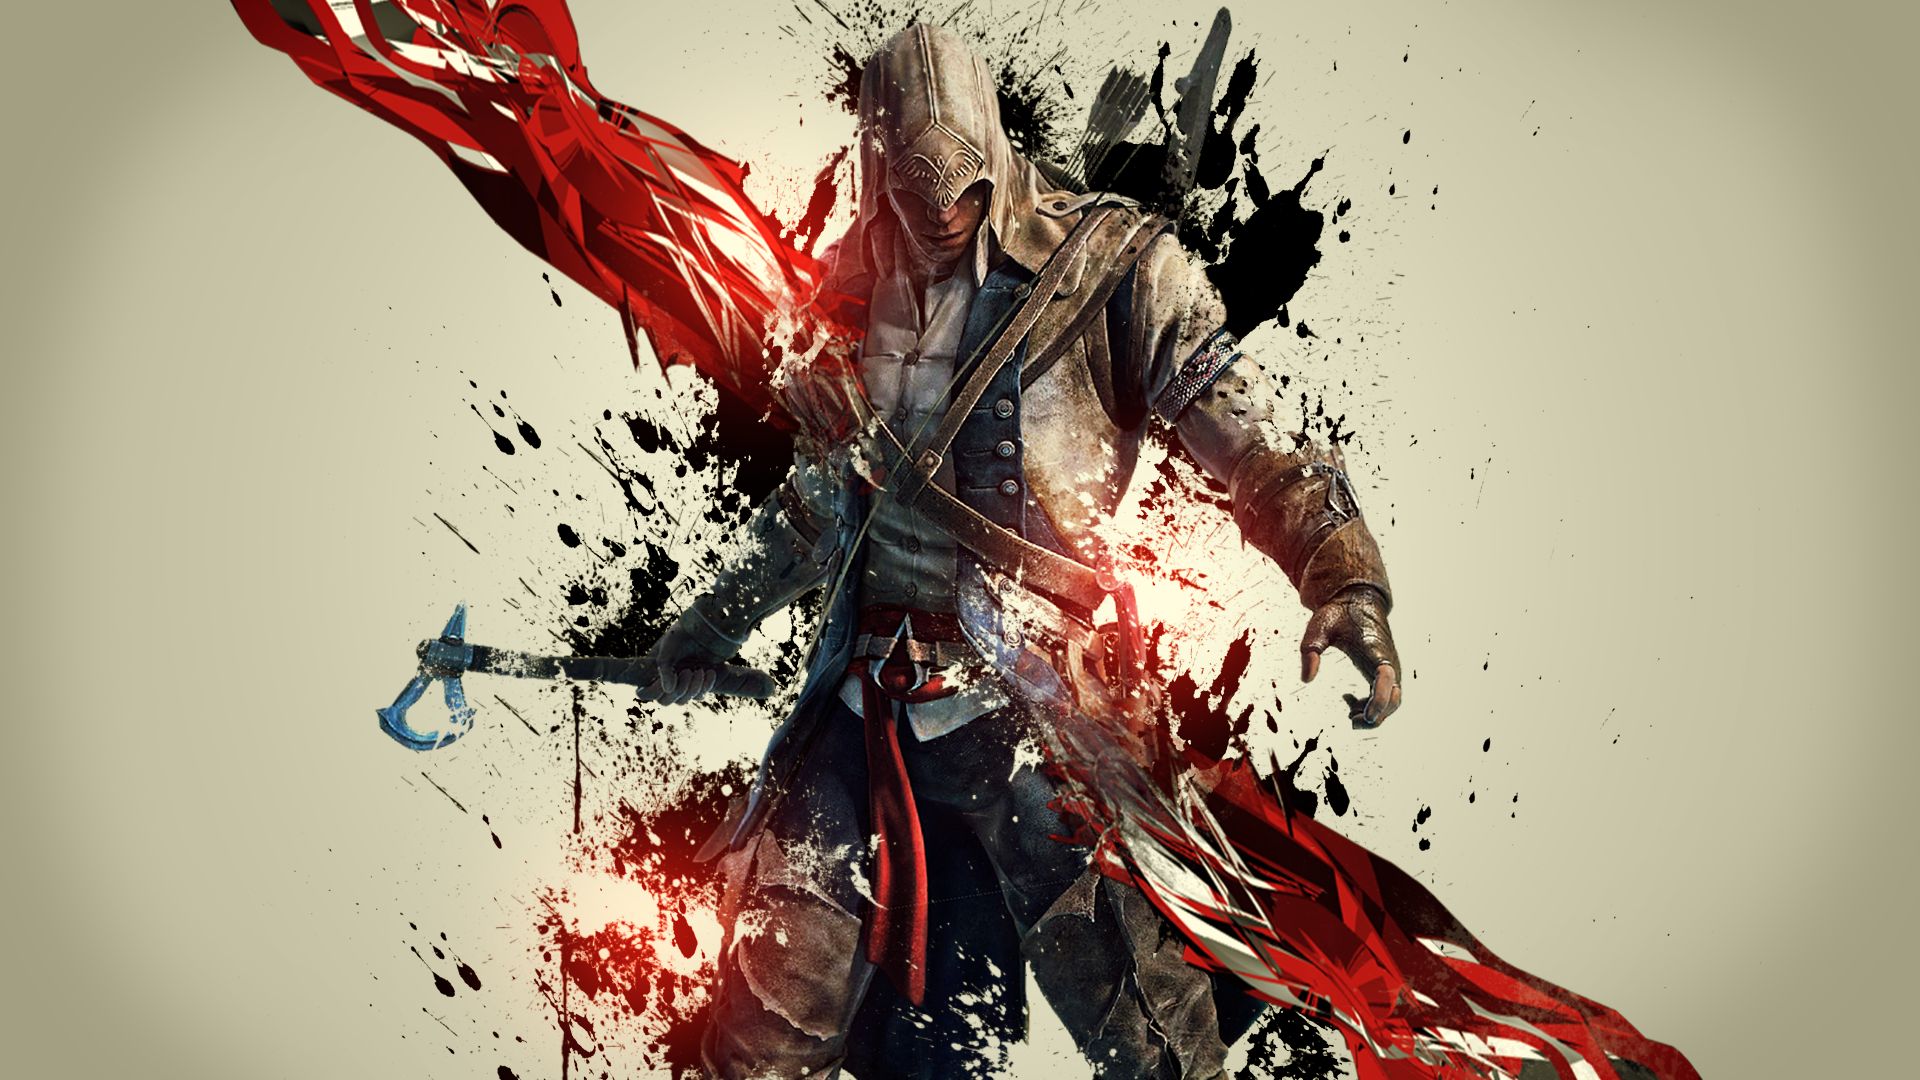 warrior, connor (assassin's creed), assassin's creed iii, assassin's creed, video game